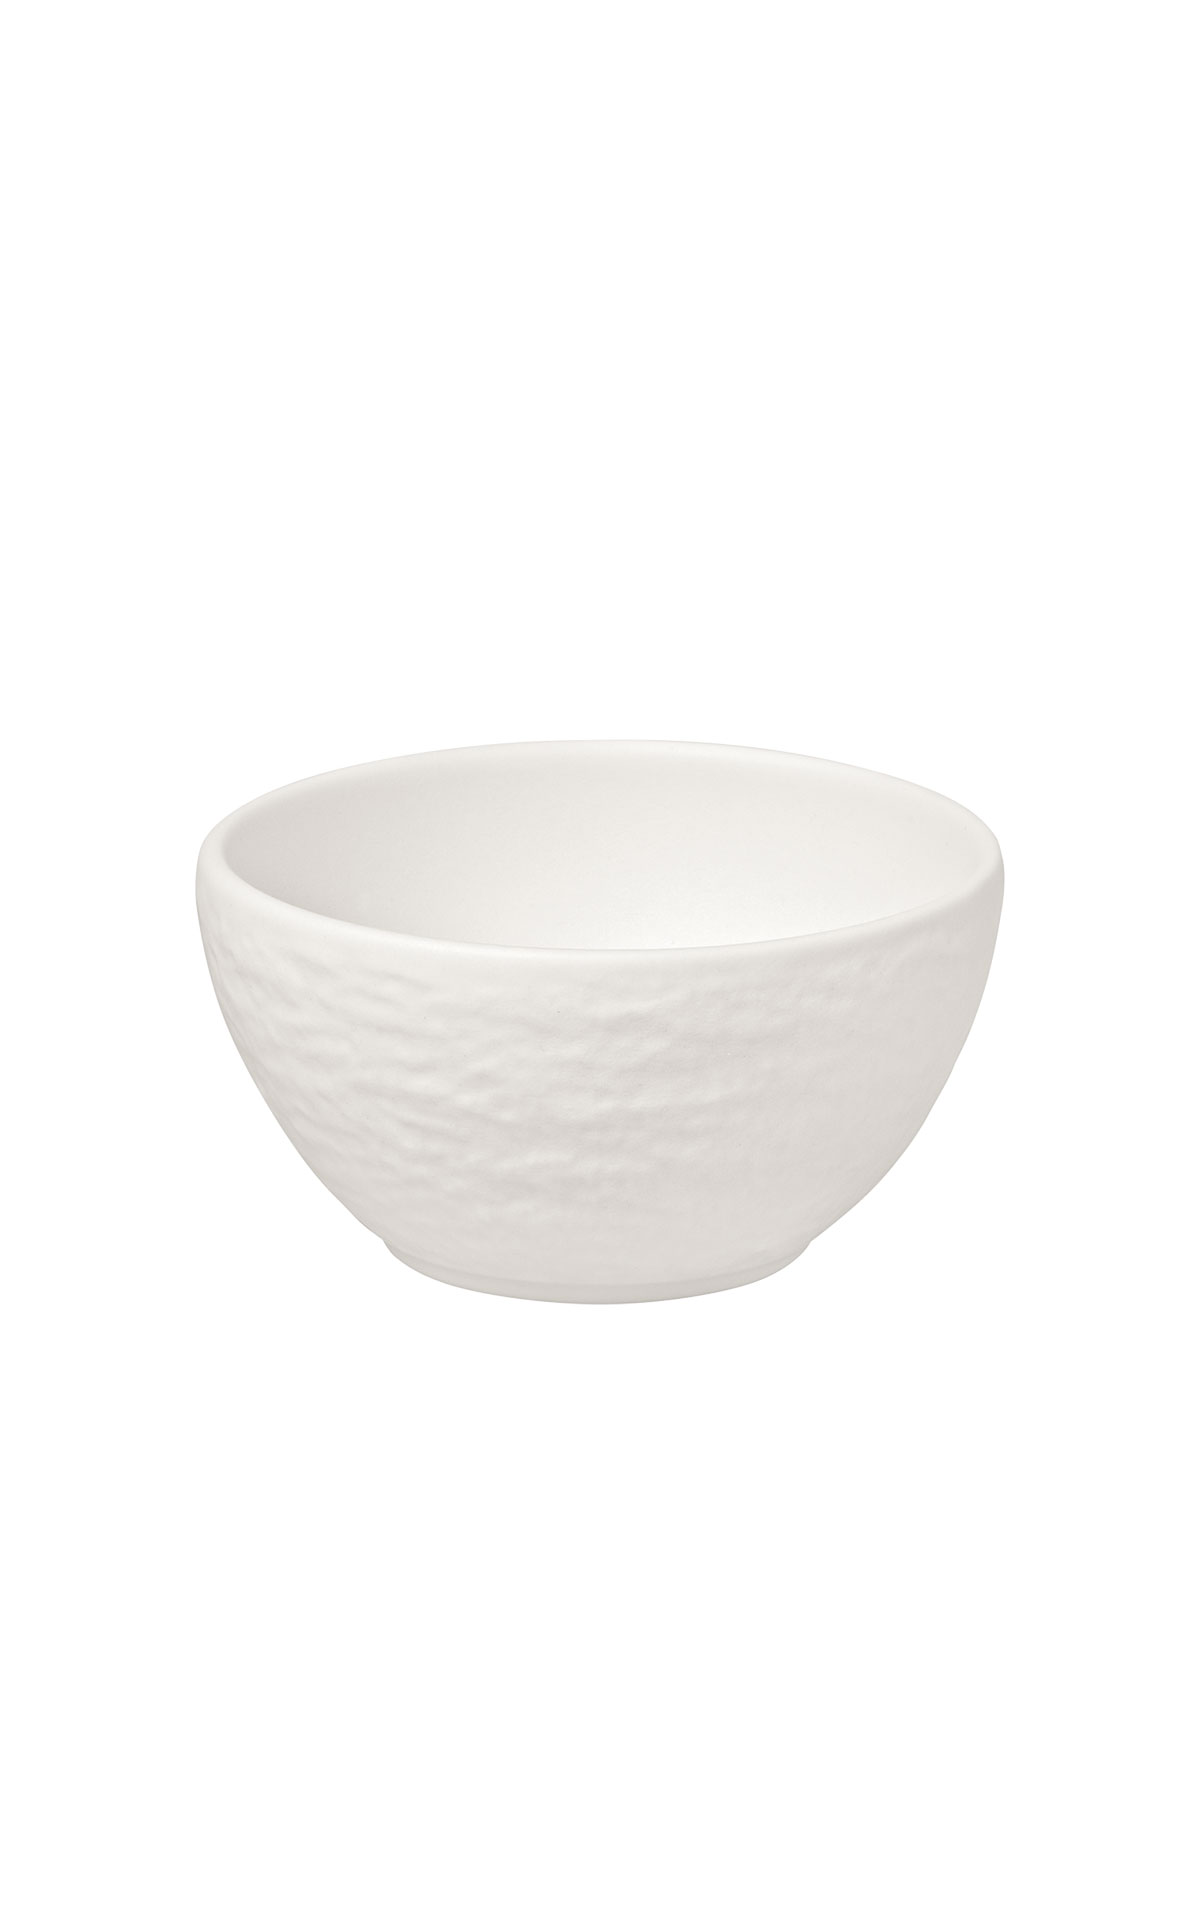 Villeroy and Boch Manufacture blanc bowl from Bicester Village